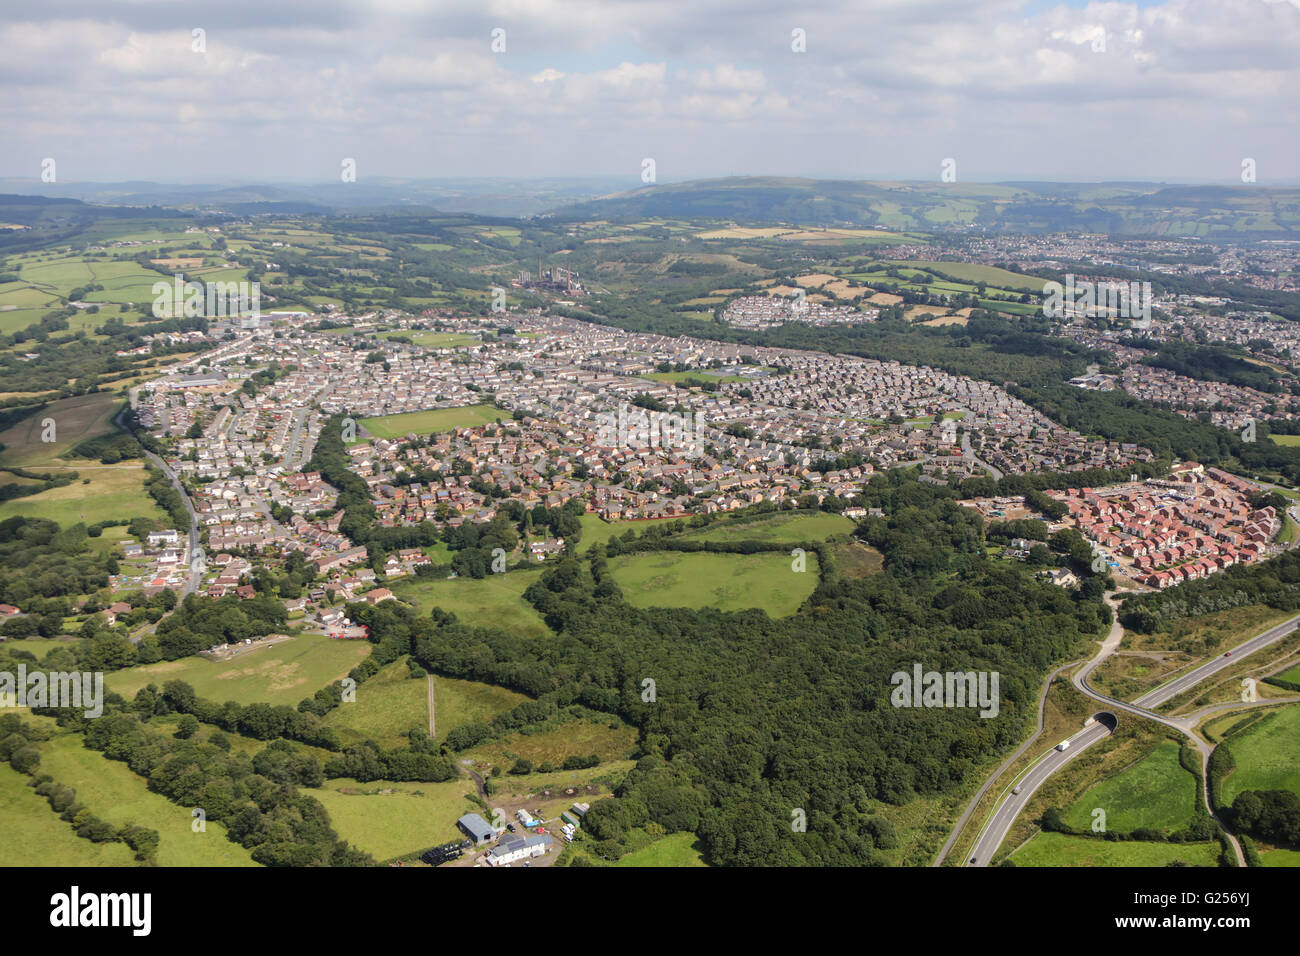 An aerial view of the South Wales town of Beddau and surrounding landscape Stock Photo